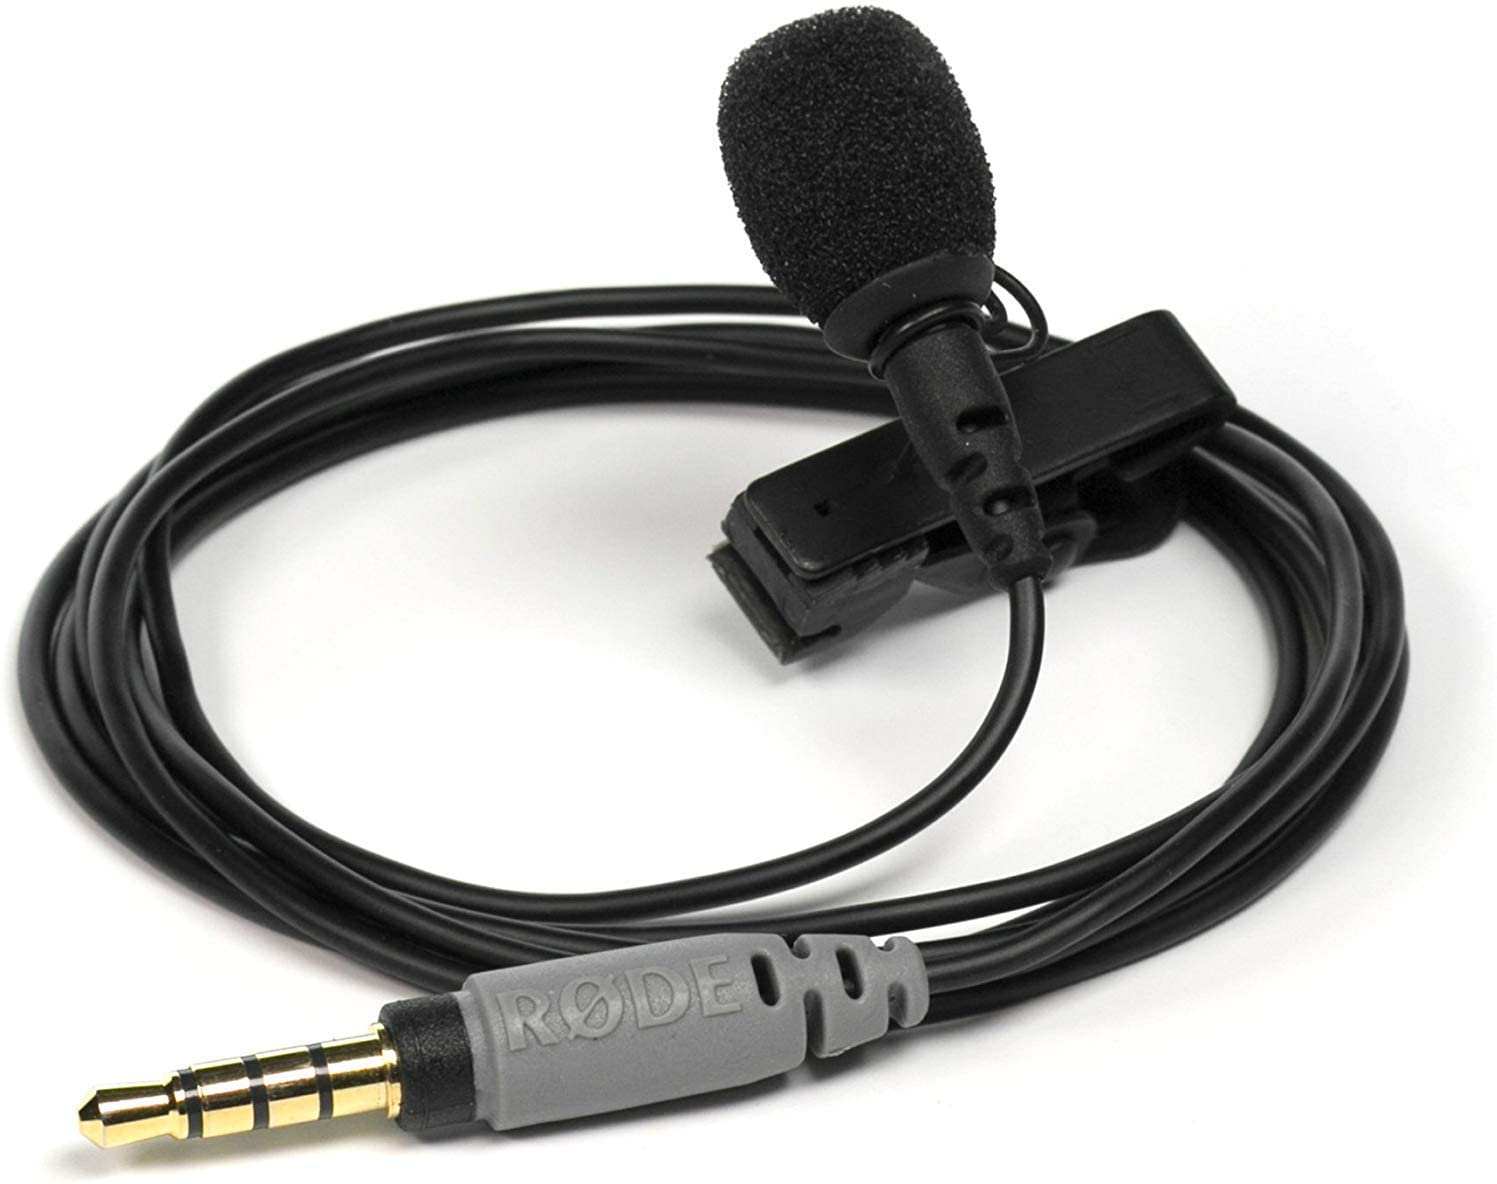 Example for a Lavalier Microphone